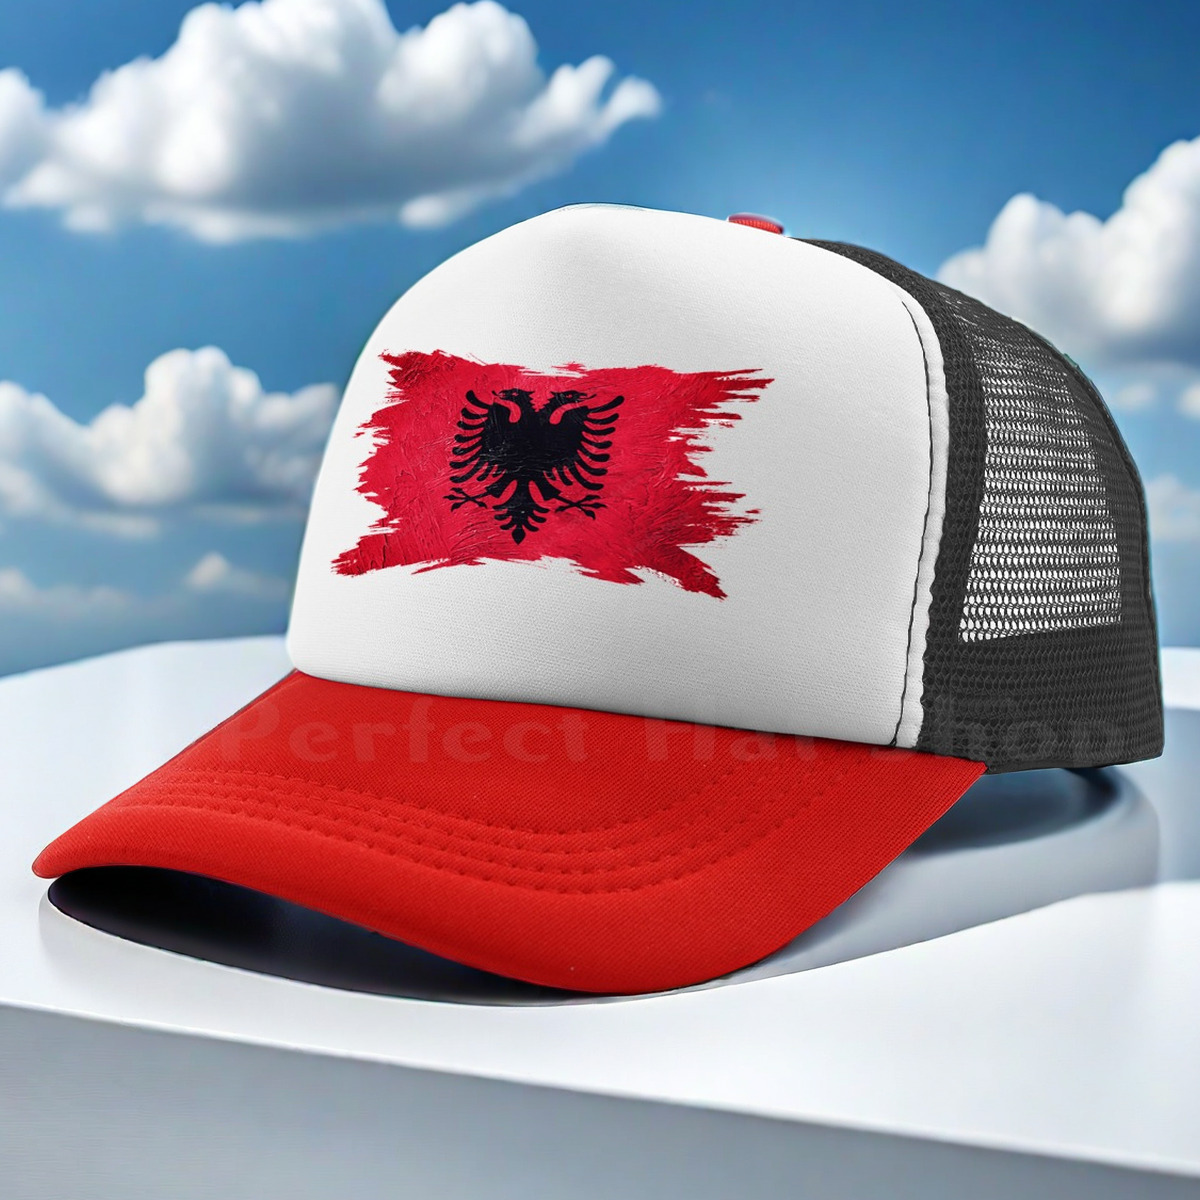 

Albanian-inspired Baseball Cap: Breathable, Adjustable, And Stylish With A Rich Red And Blue Color Scheme